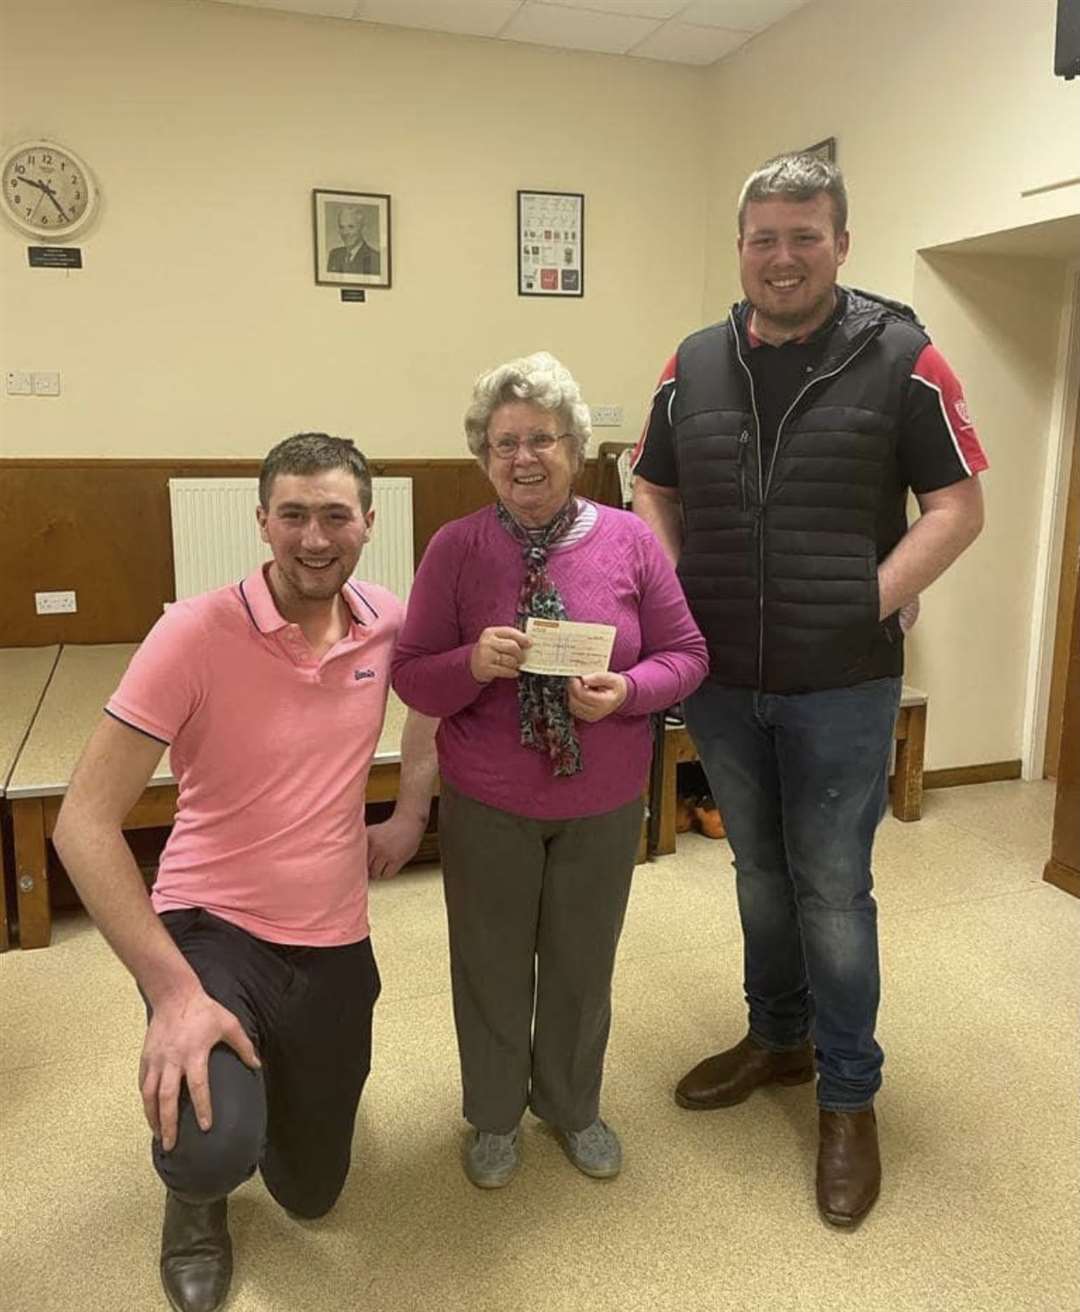 The Strathbogie Young Farmers made a donation to the Huntly OAP club after the game.